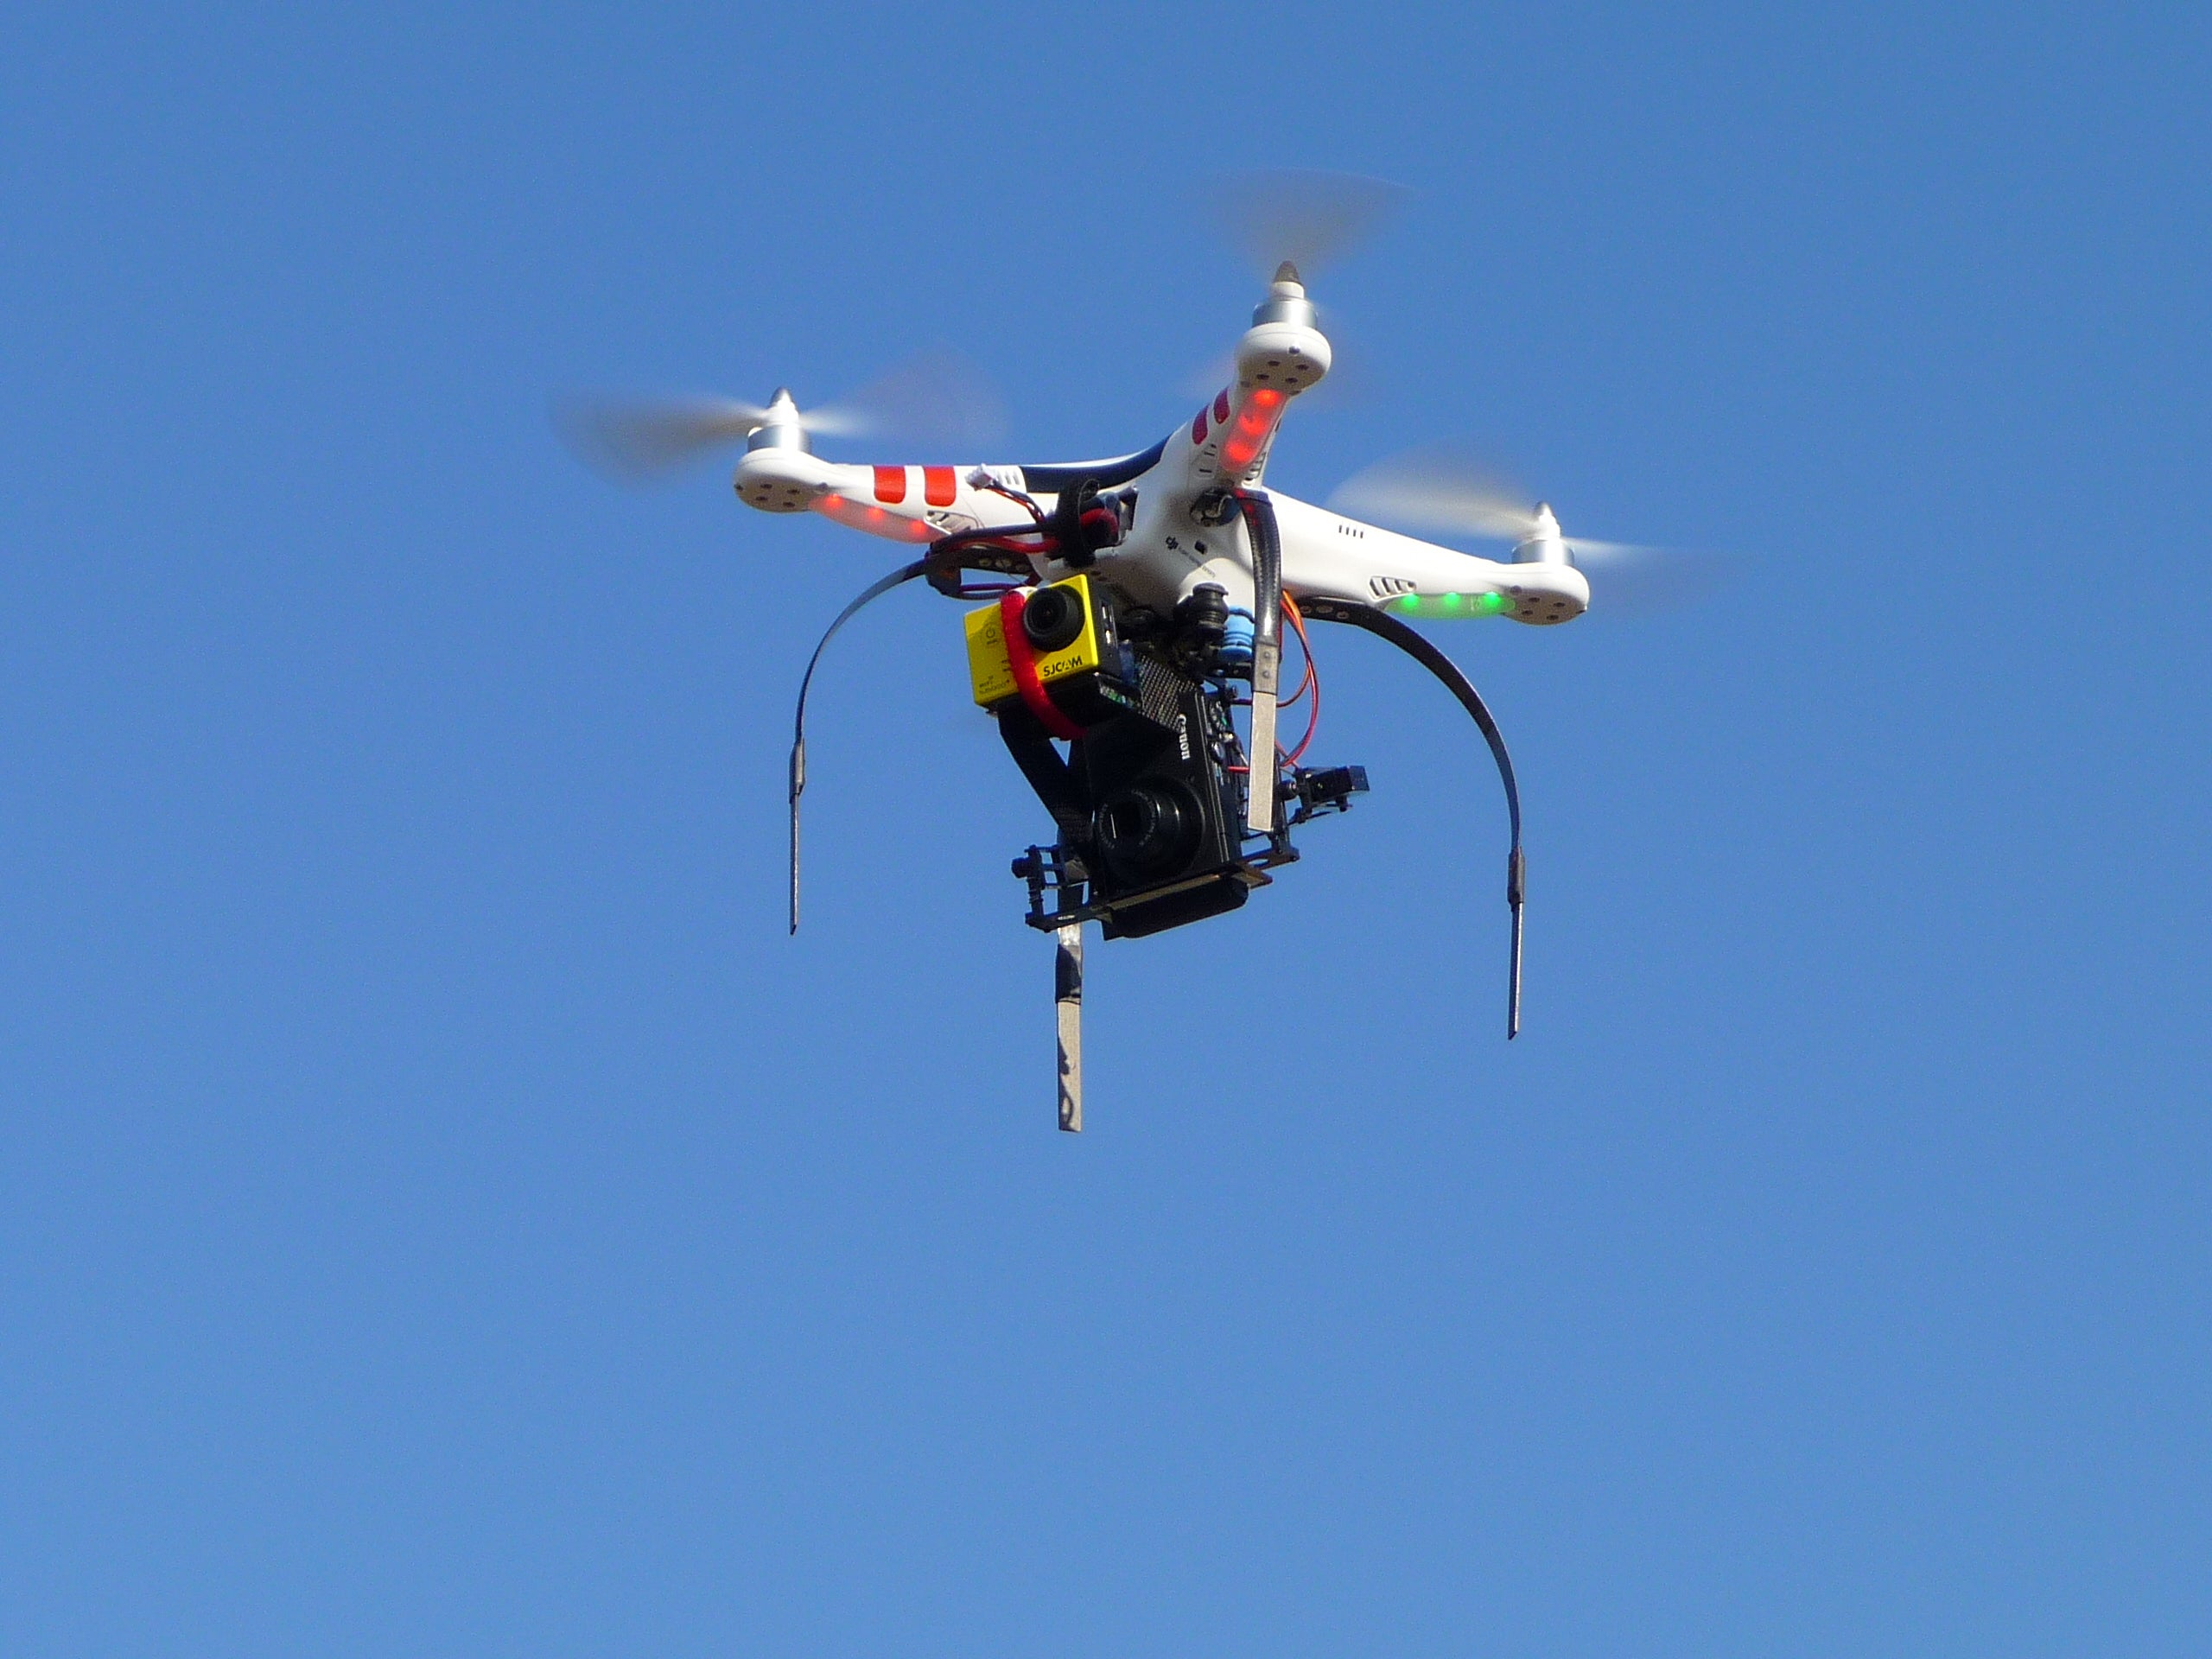 A quadricopter drone with an on-board camera. Photo credit: Flickr user Carlos Honda